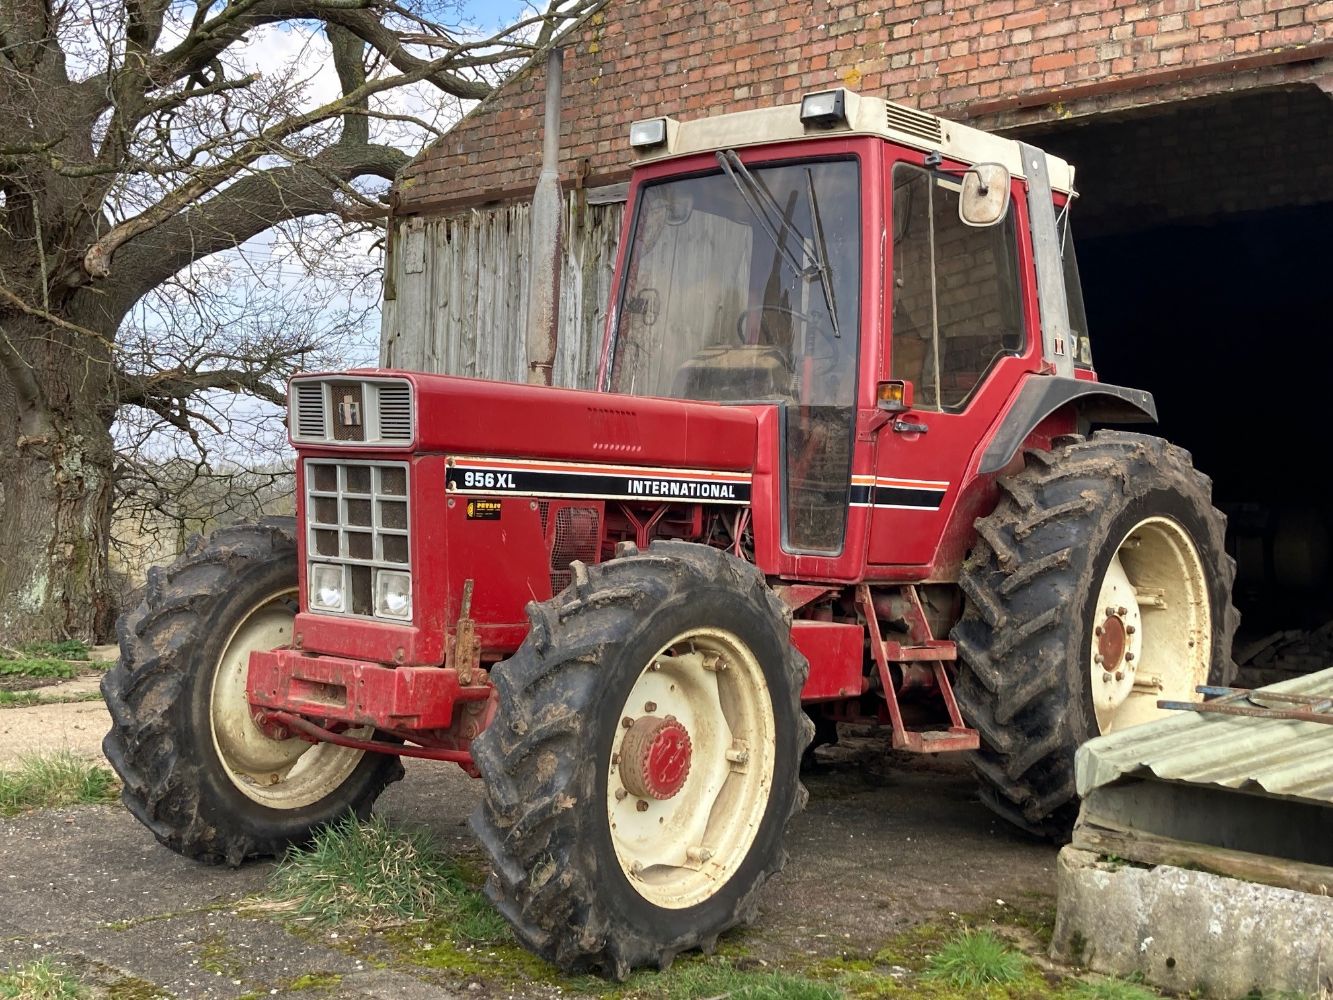 Timed Online Dispersal Auction of Vintage & Classic Tractors, Crawlers, Vehicles & Implements